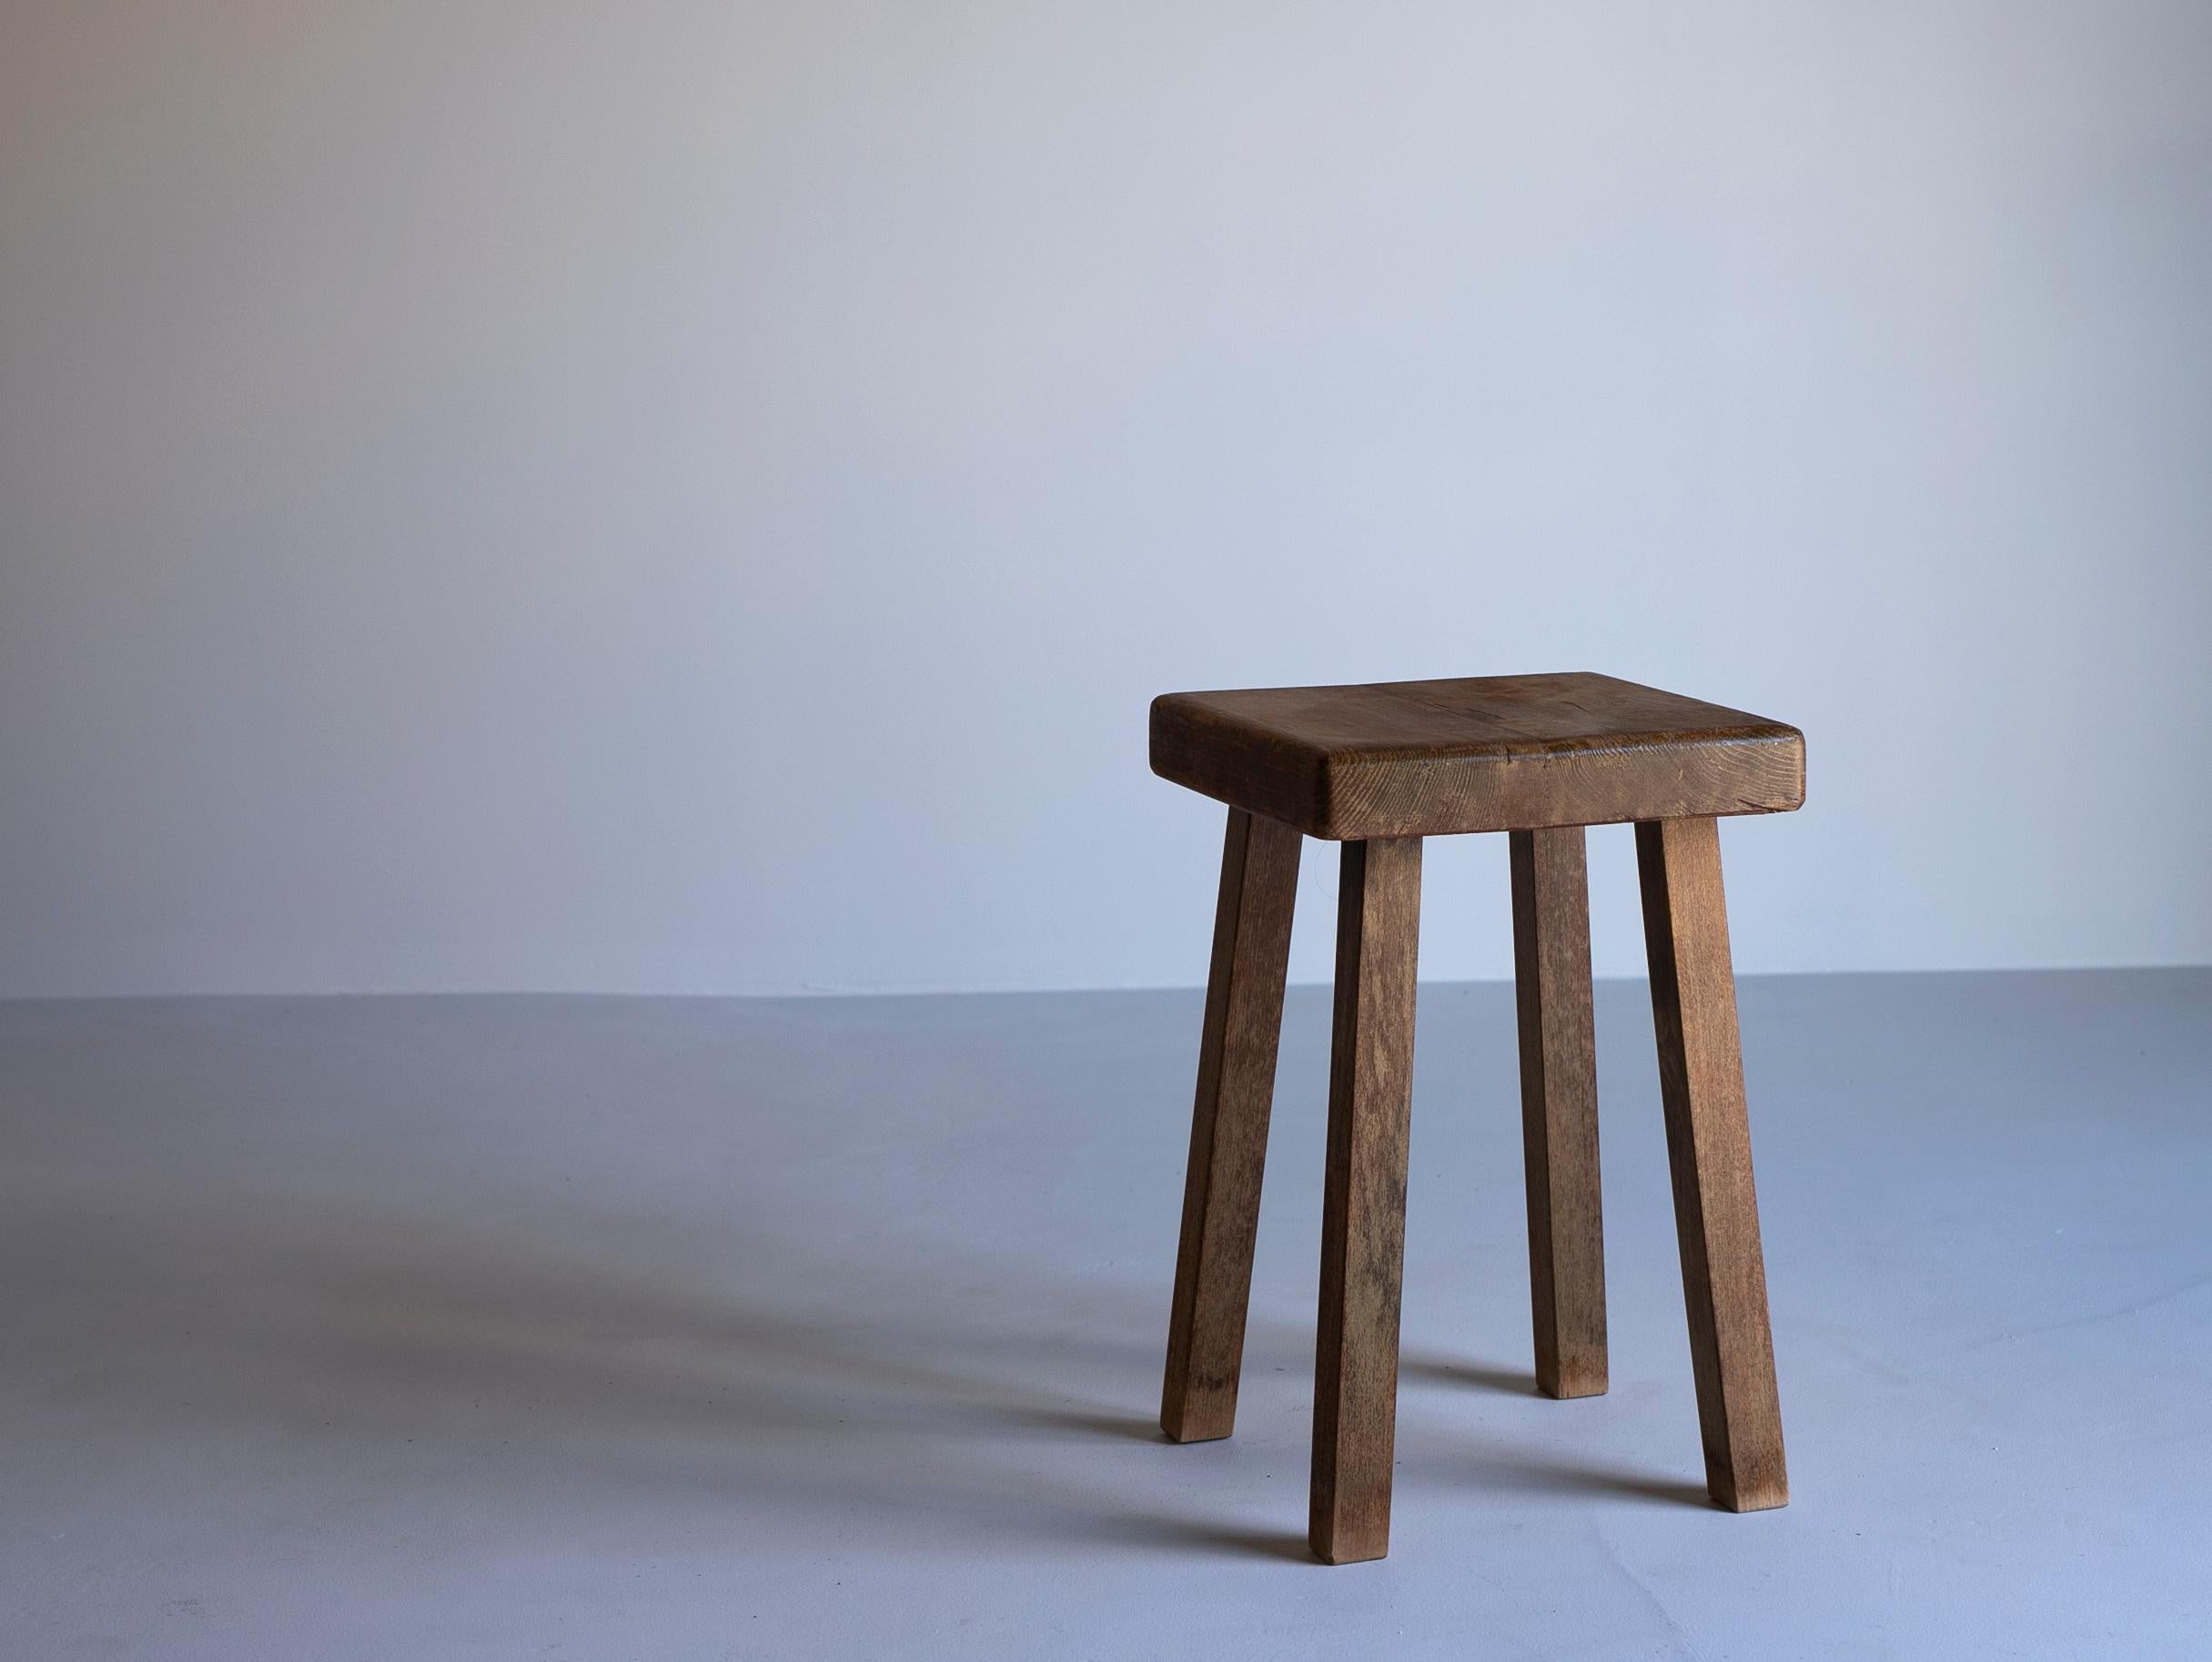 Wood stool for Arc 1800 by Charlotte Perriand

A stool designed by Charlotte Perriand for the Les Arcs ski resort, circa 1960.
This stool was used in Arc 1800.
The stool is in original condition, but shows some wear and tear due to age and